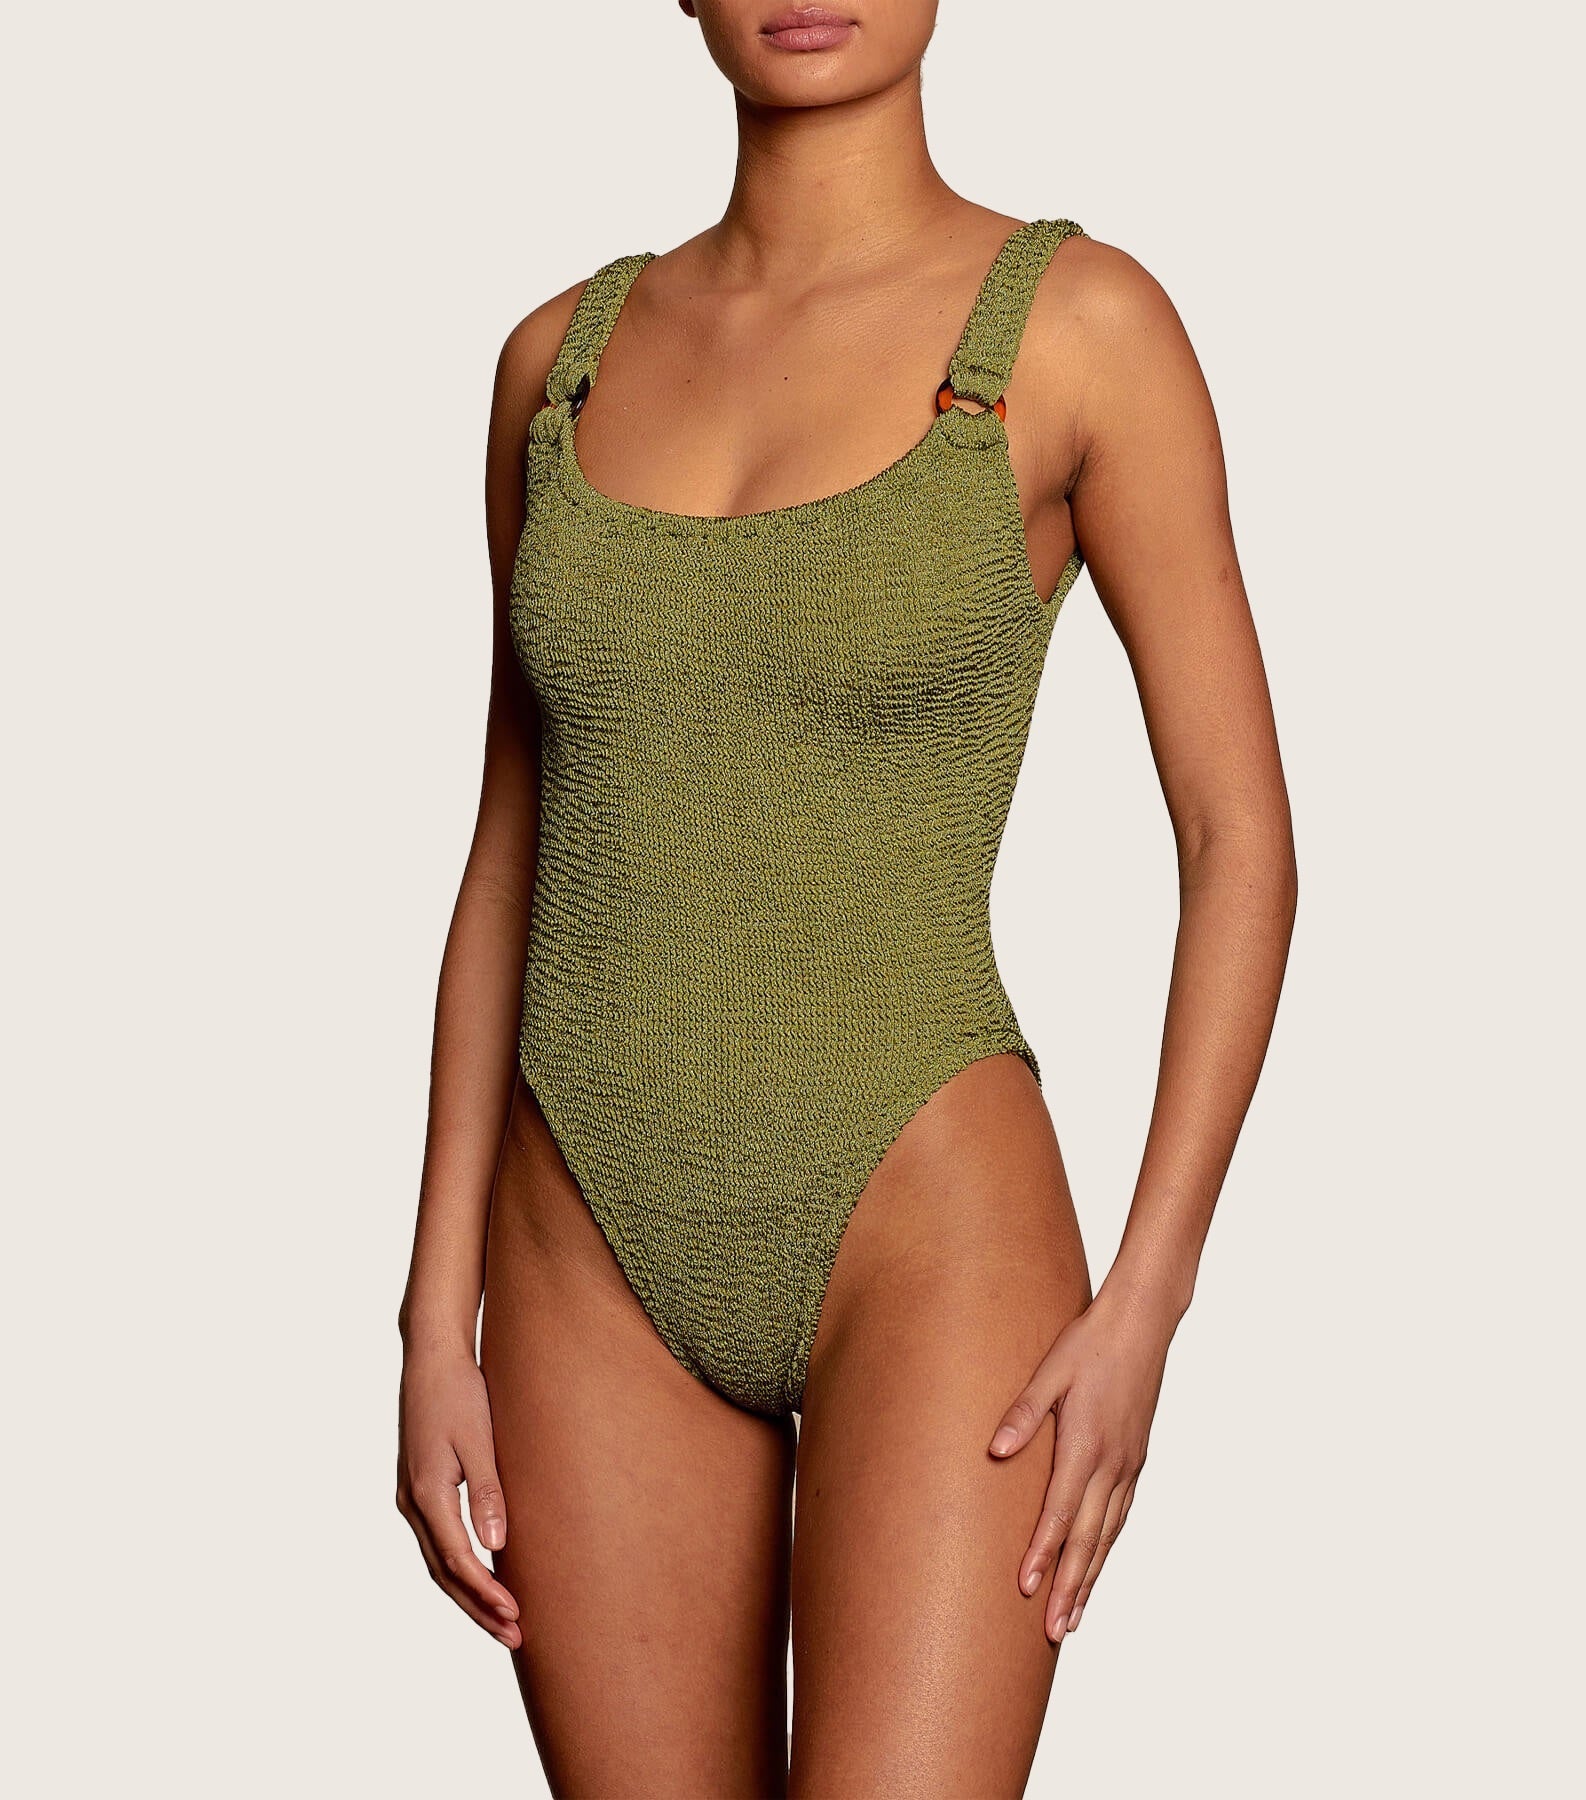 Hunza G Domino Swim in Metallic Moss available at The New Trend Australia